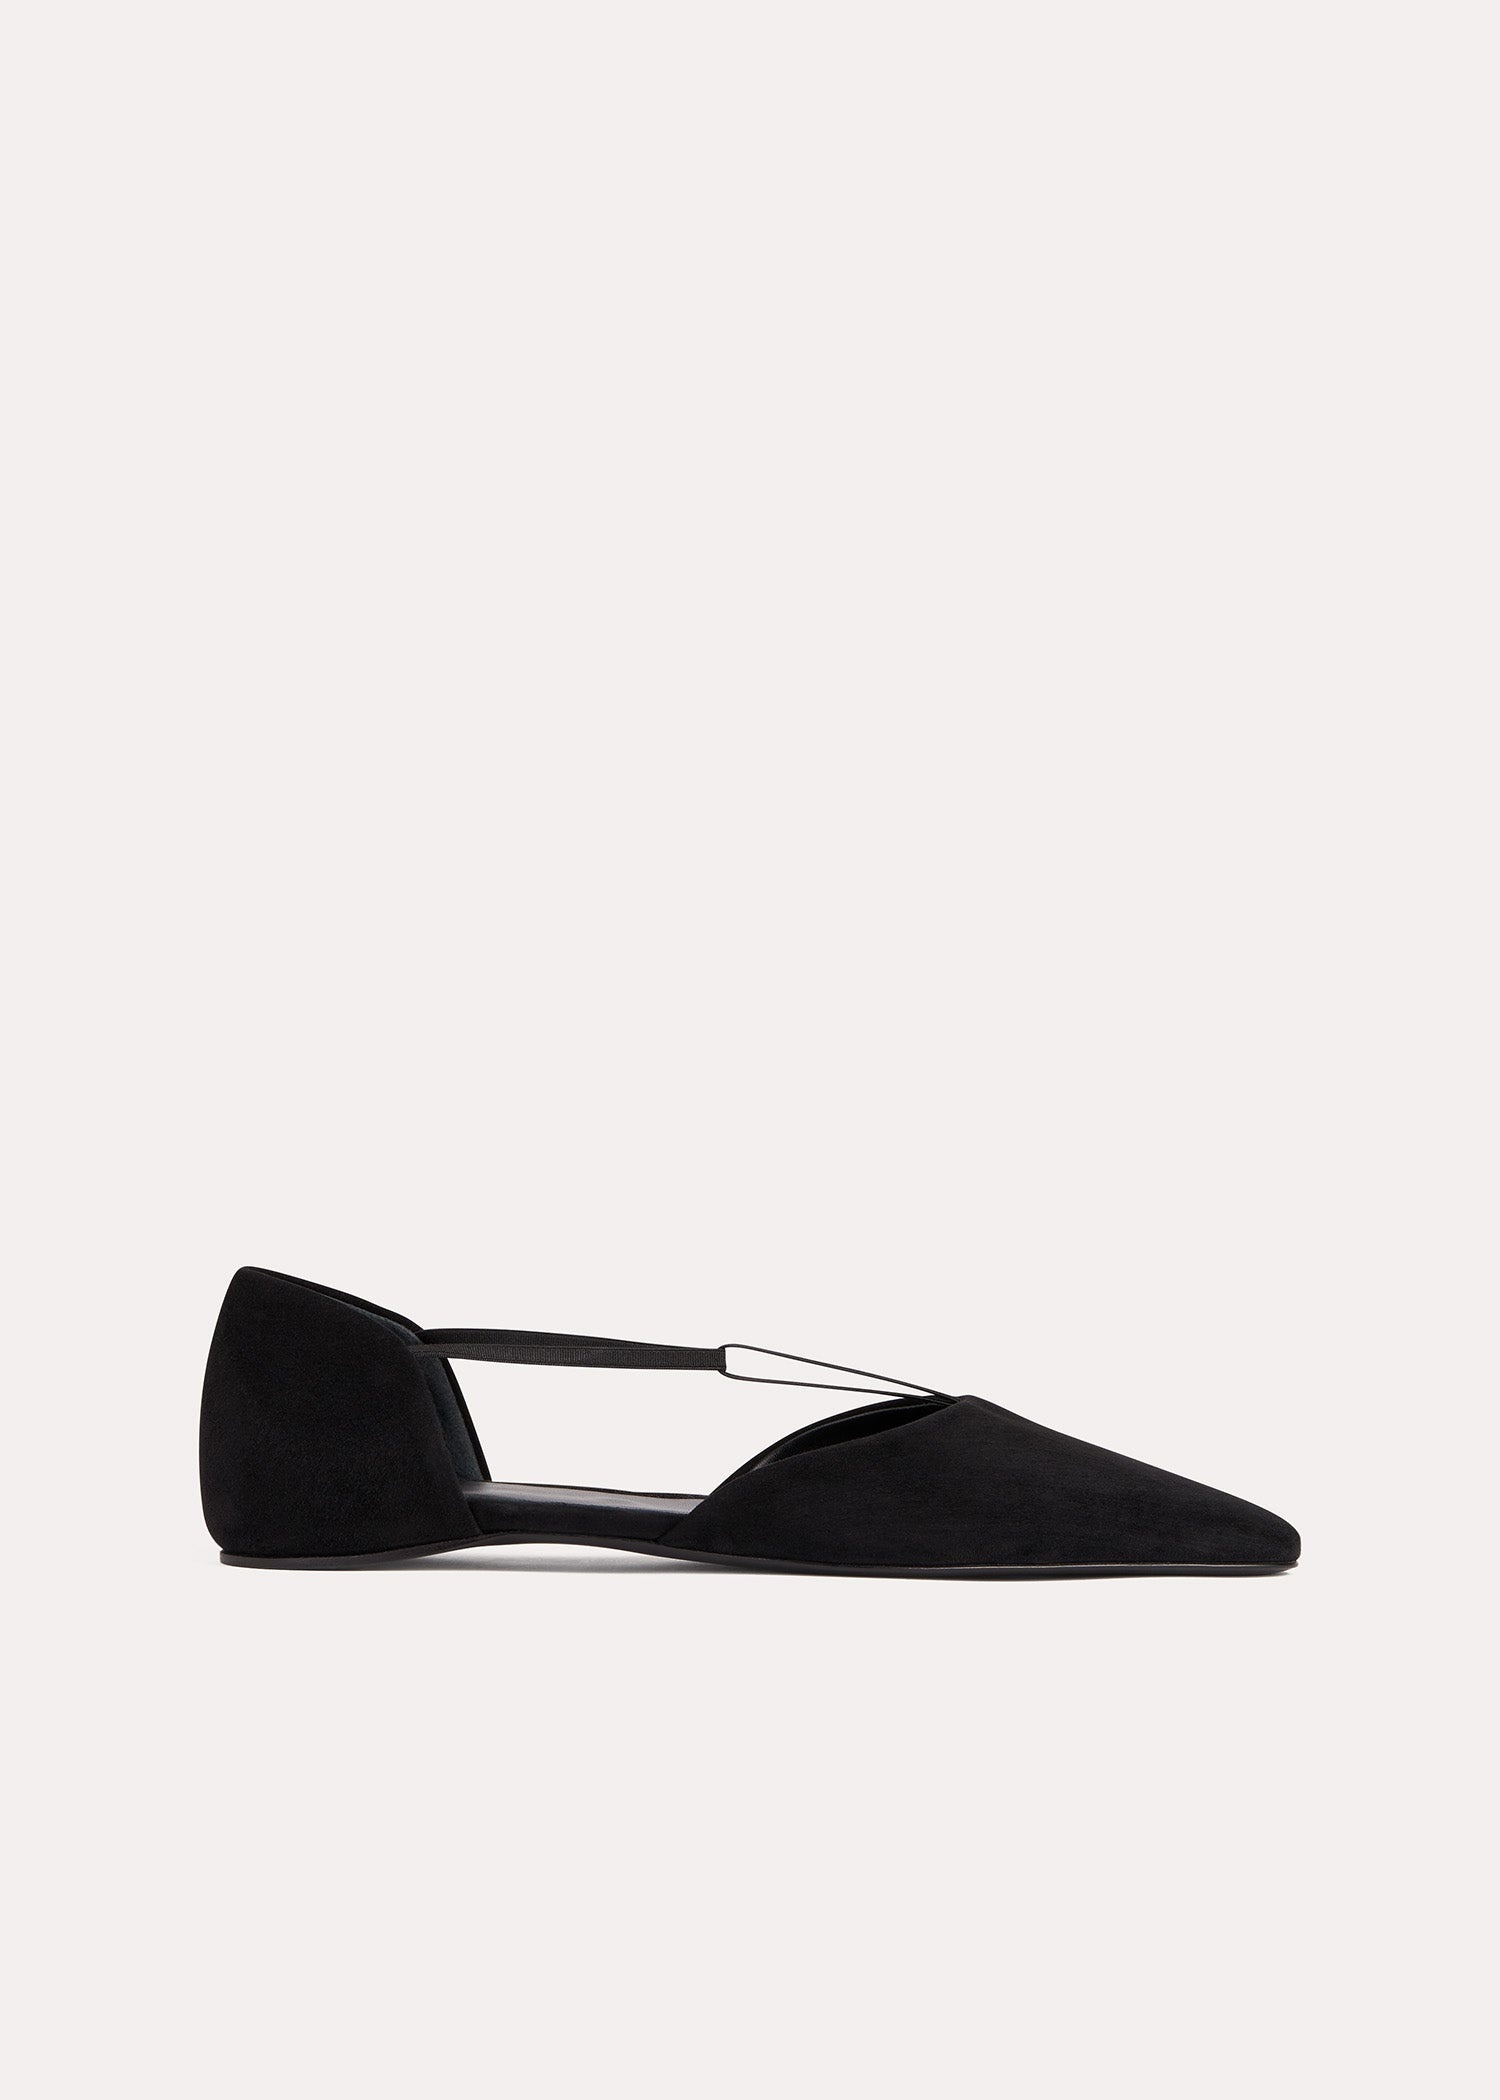 The Suede T-Strap Flat black - 7